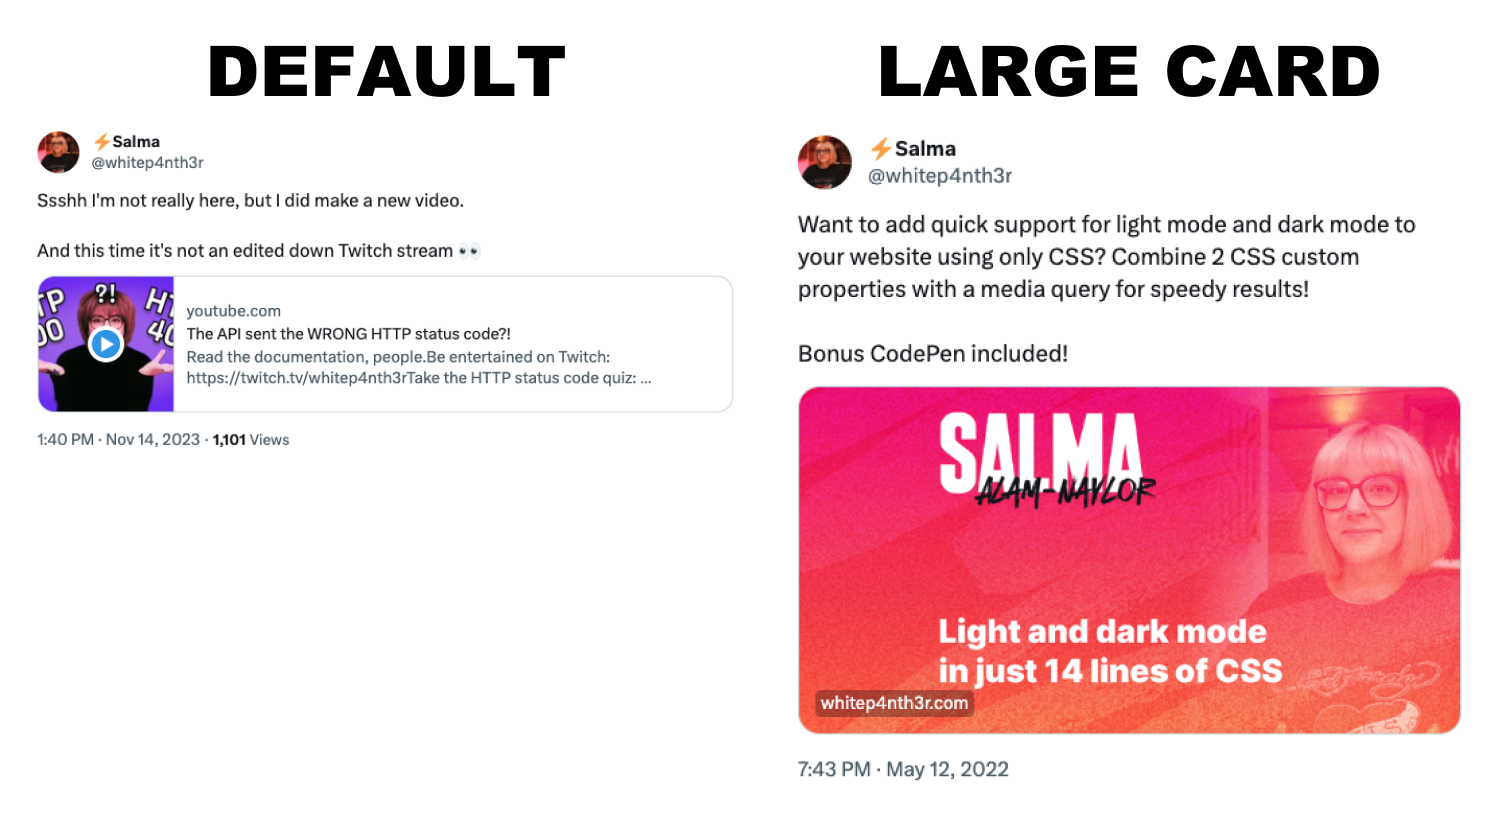 Two tweets side by side with link previews. On the left there is a default card showing a square image next to a title and meta description. On the right there is a summary large card link, which does not show title and meta description, just the open graph image.